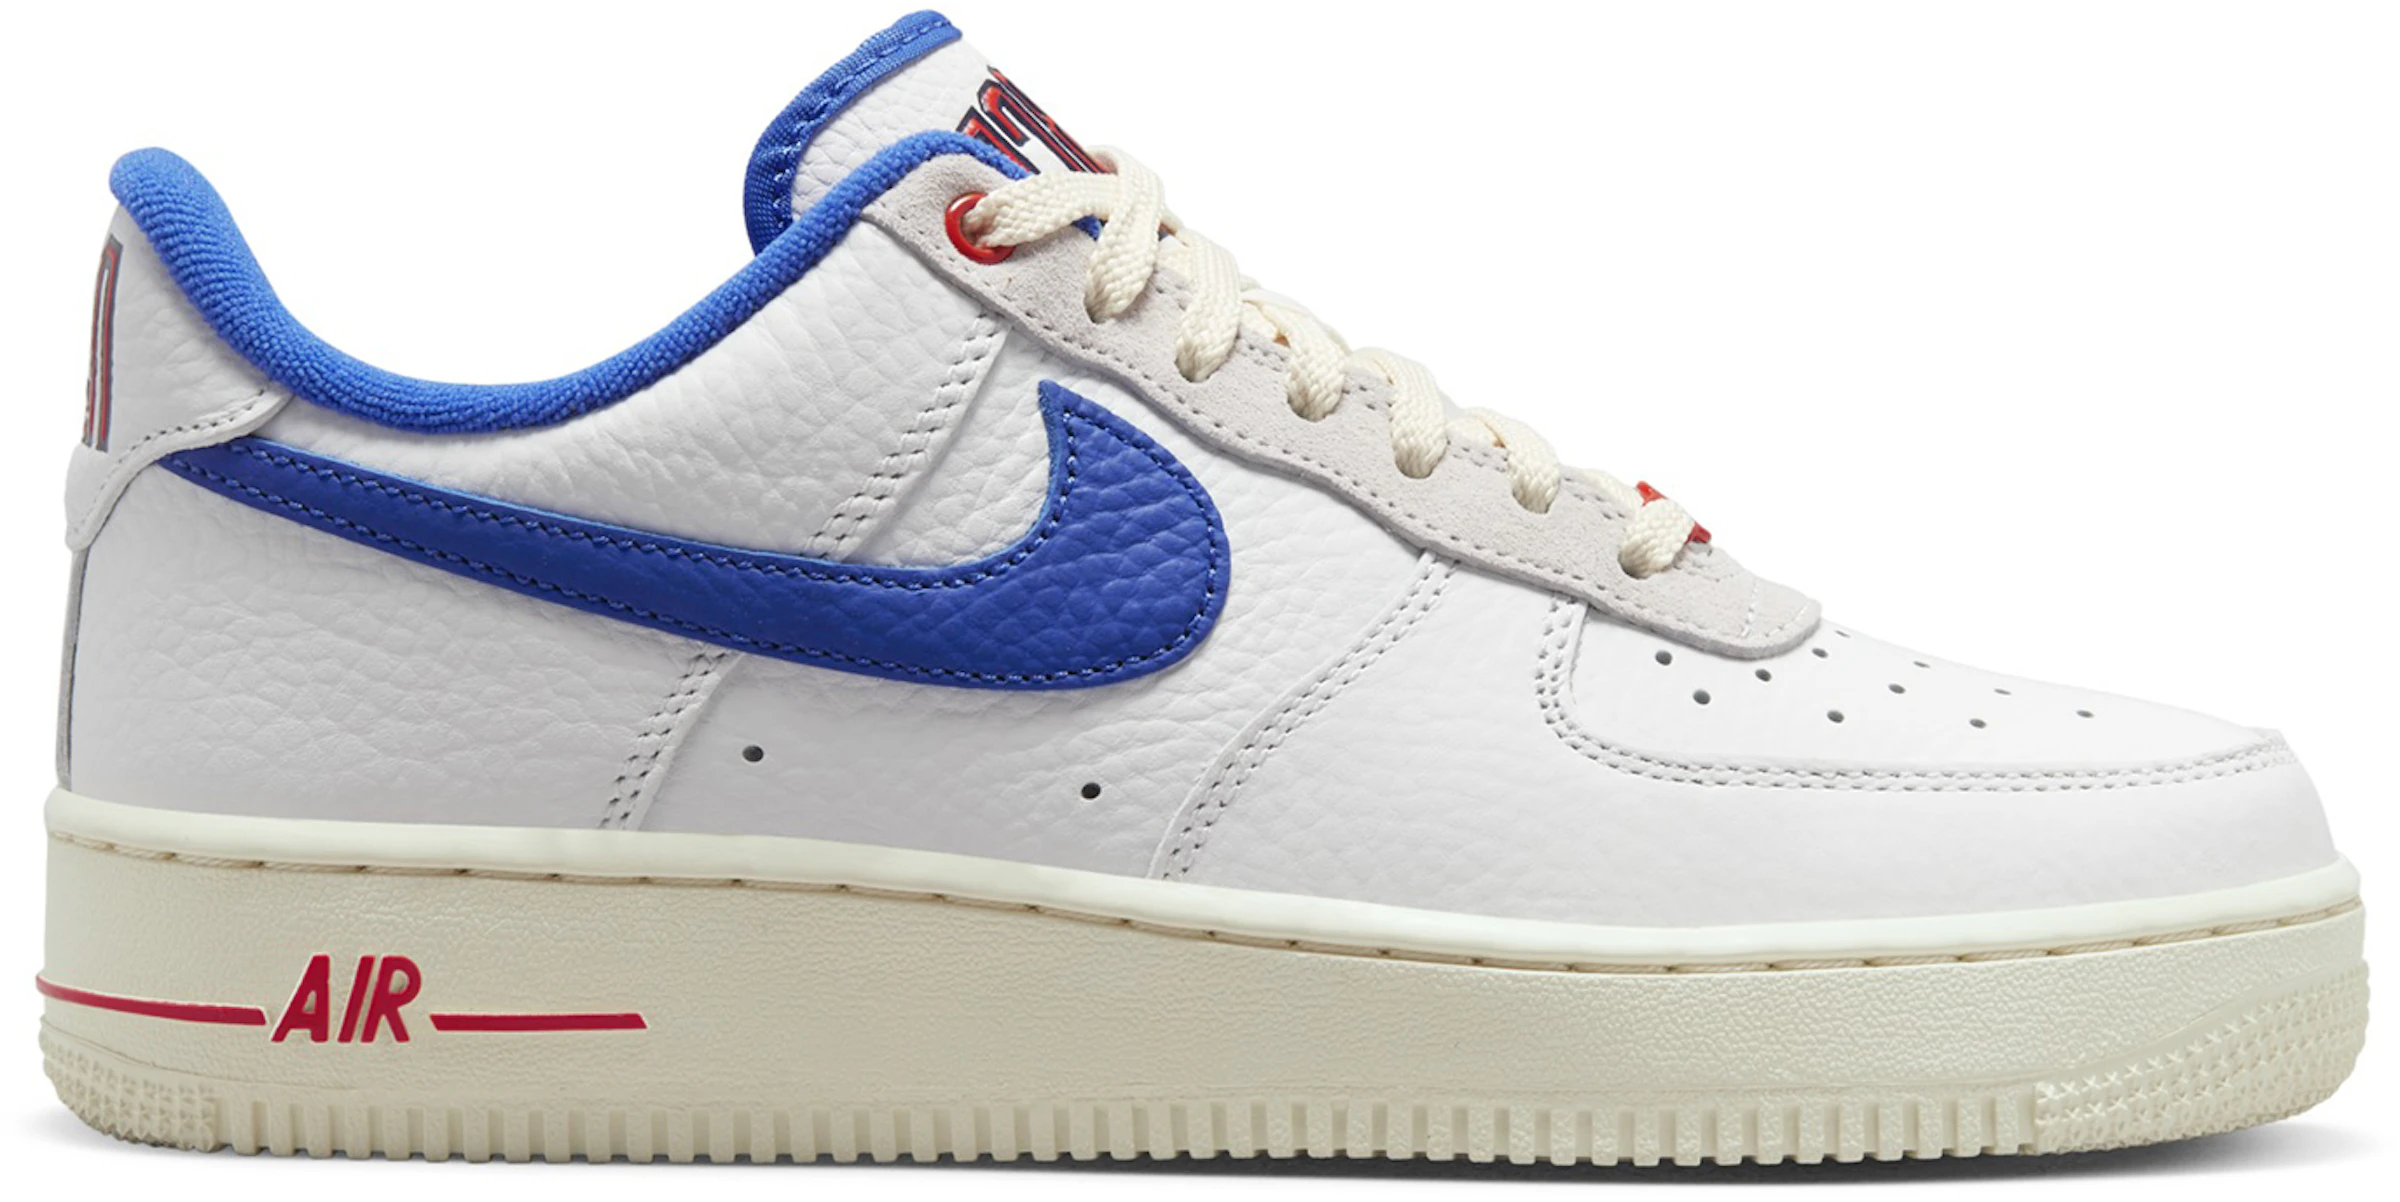 Nike Air Force 1 '07 LX Low Command Force University Blue Summit White (W) - - ES